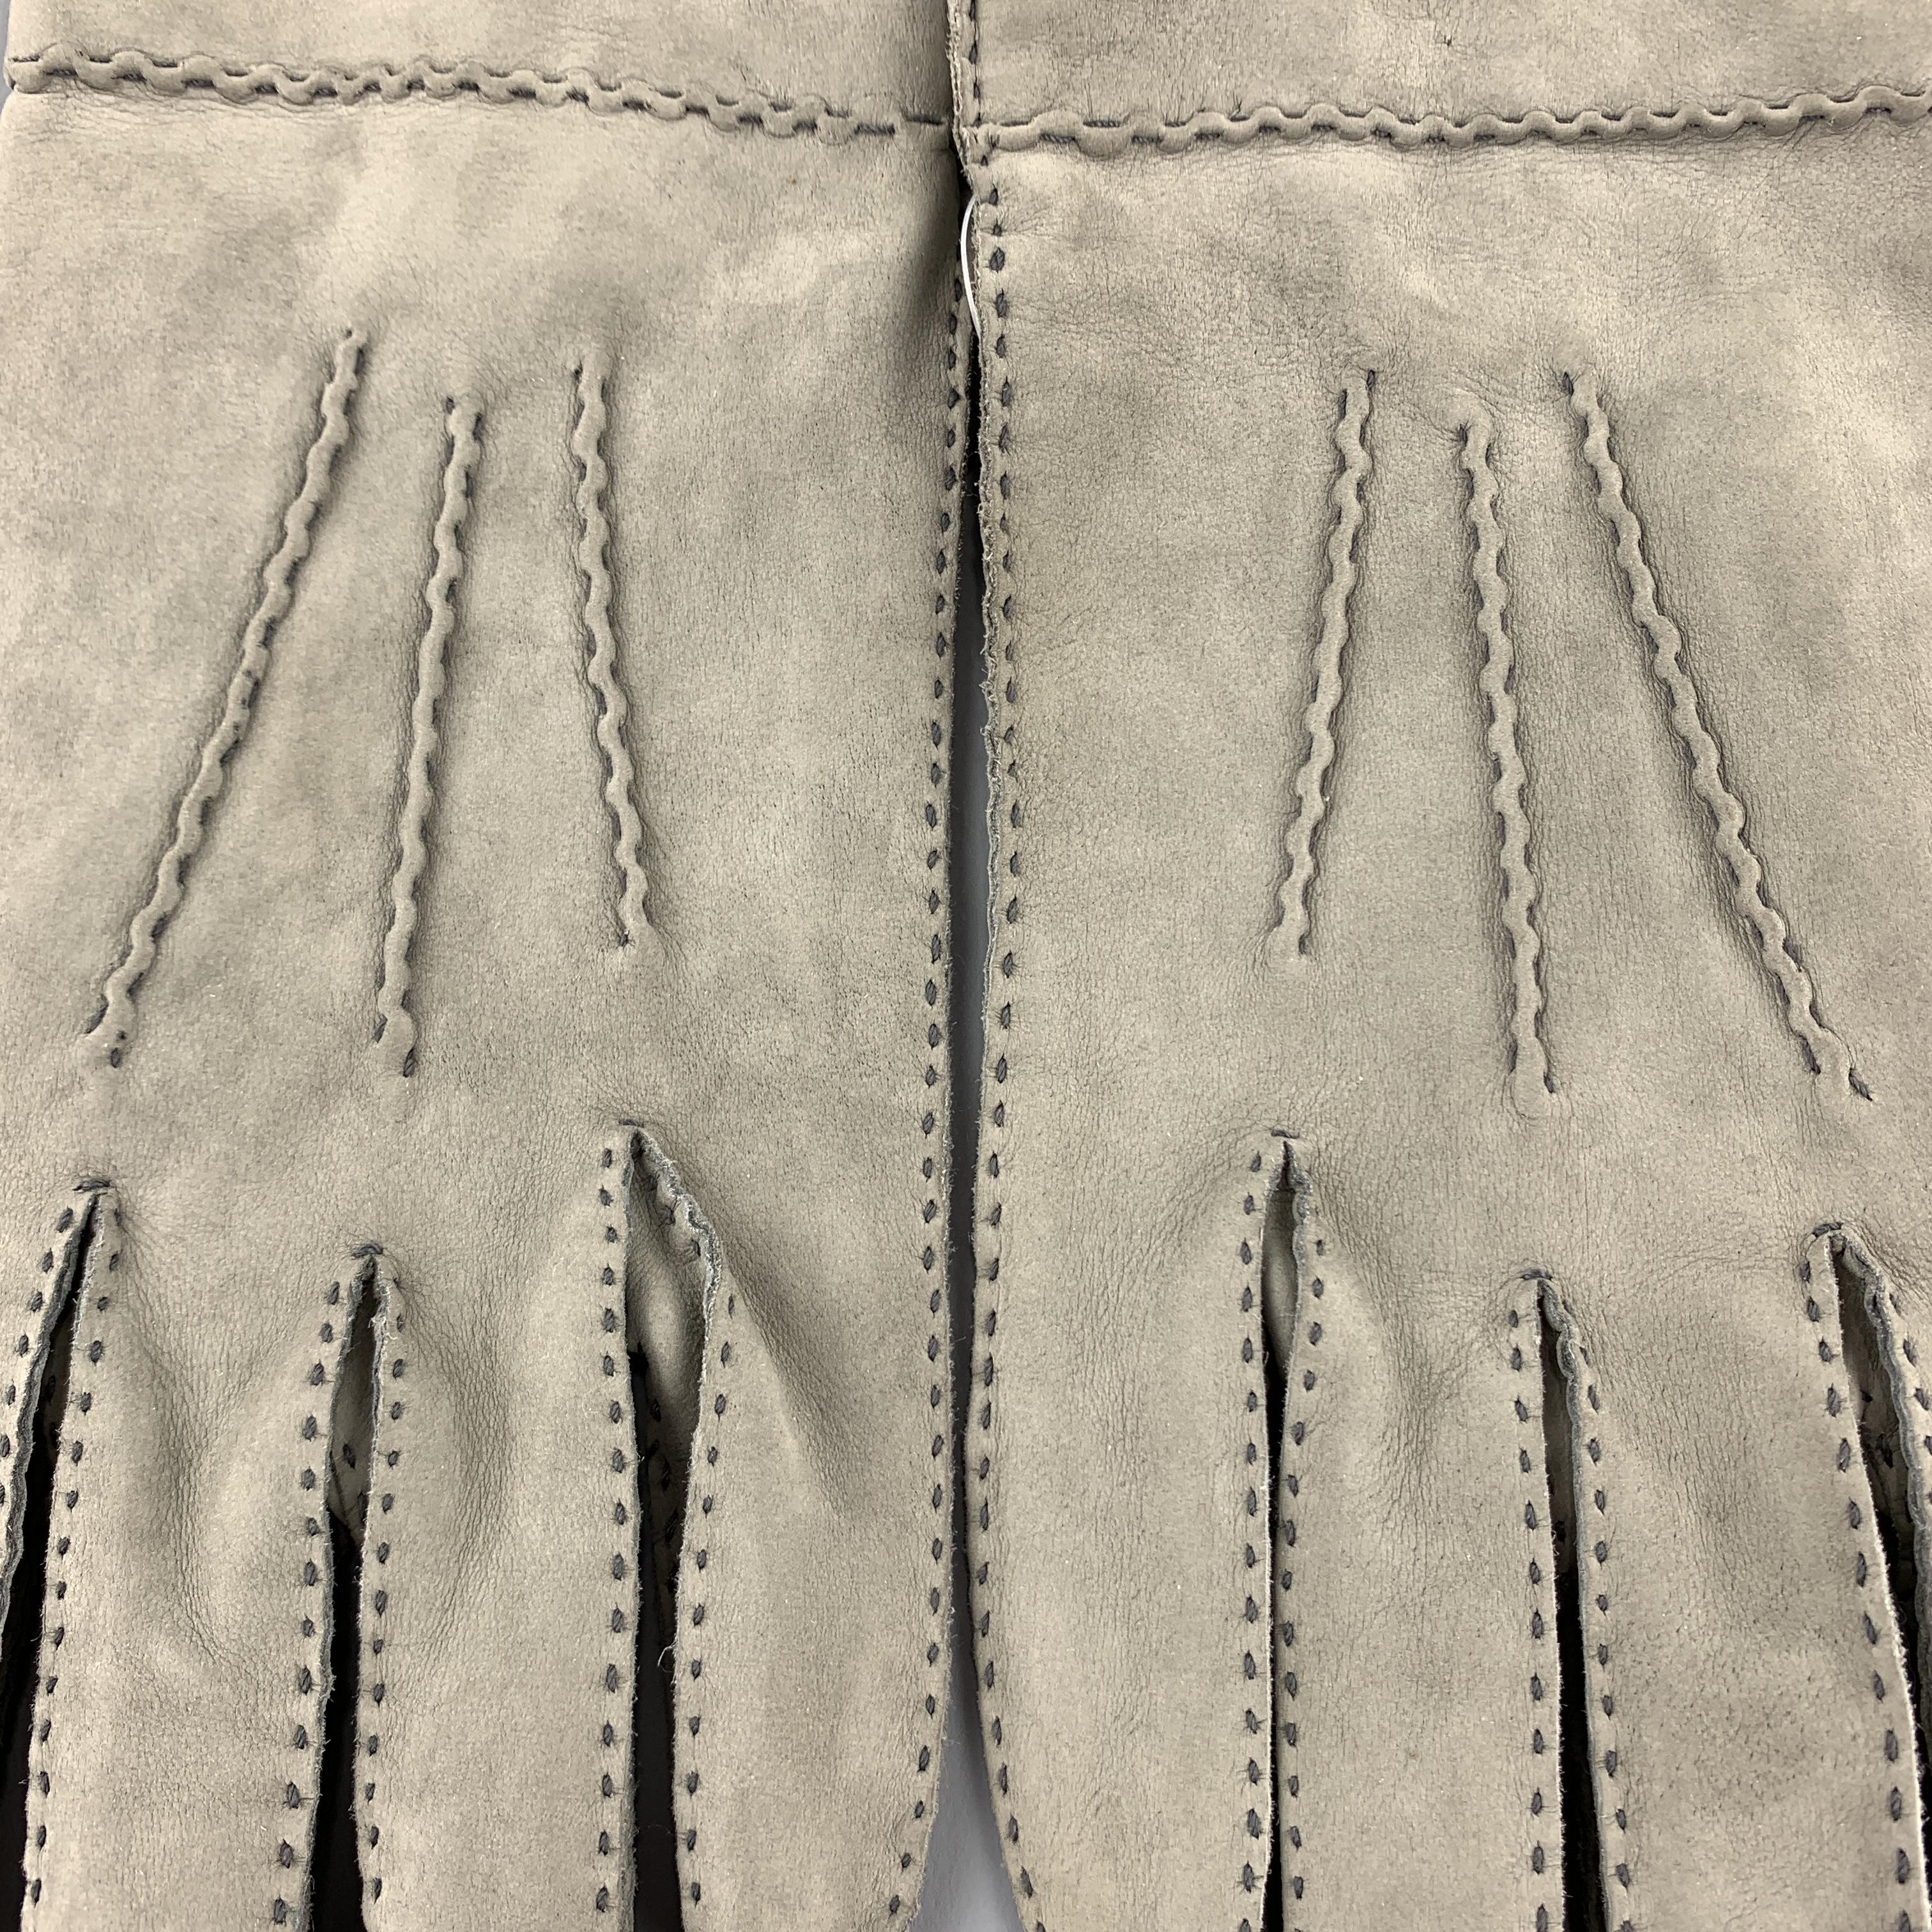 Vintage LORD'S gloves come in gray leather with top stitching and red silk liner. Made in England.

Very Good Pre-Owned Condition.
Marked: 8

Width: 4 in.
Length: 9 in.